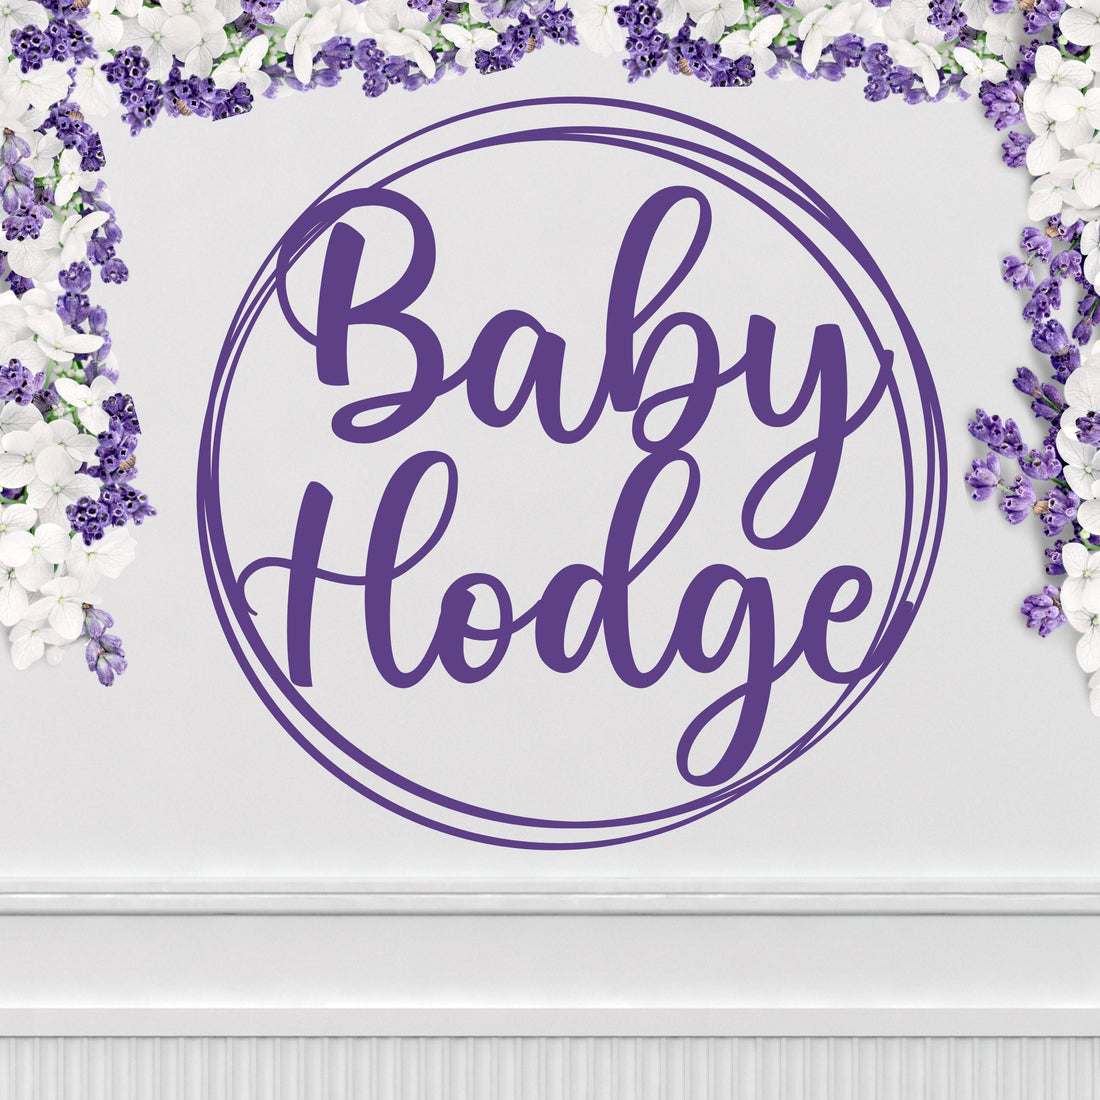 Custom Made Oh Baby Scribble Sign Hoop, Personalised Engraved Laser Cut Event Wooden Newborn Baby Name Round Wall Hanging Signs, Photo Prop/ Birthday/ Christening/ Baptism Shower Party Decor Australia